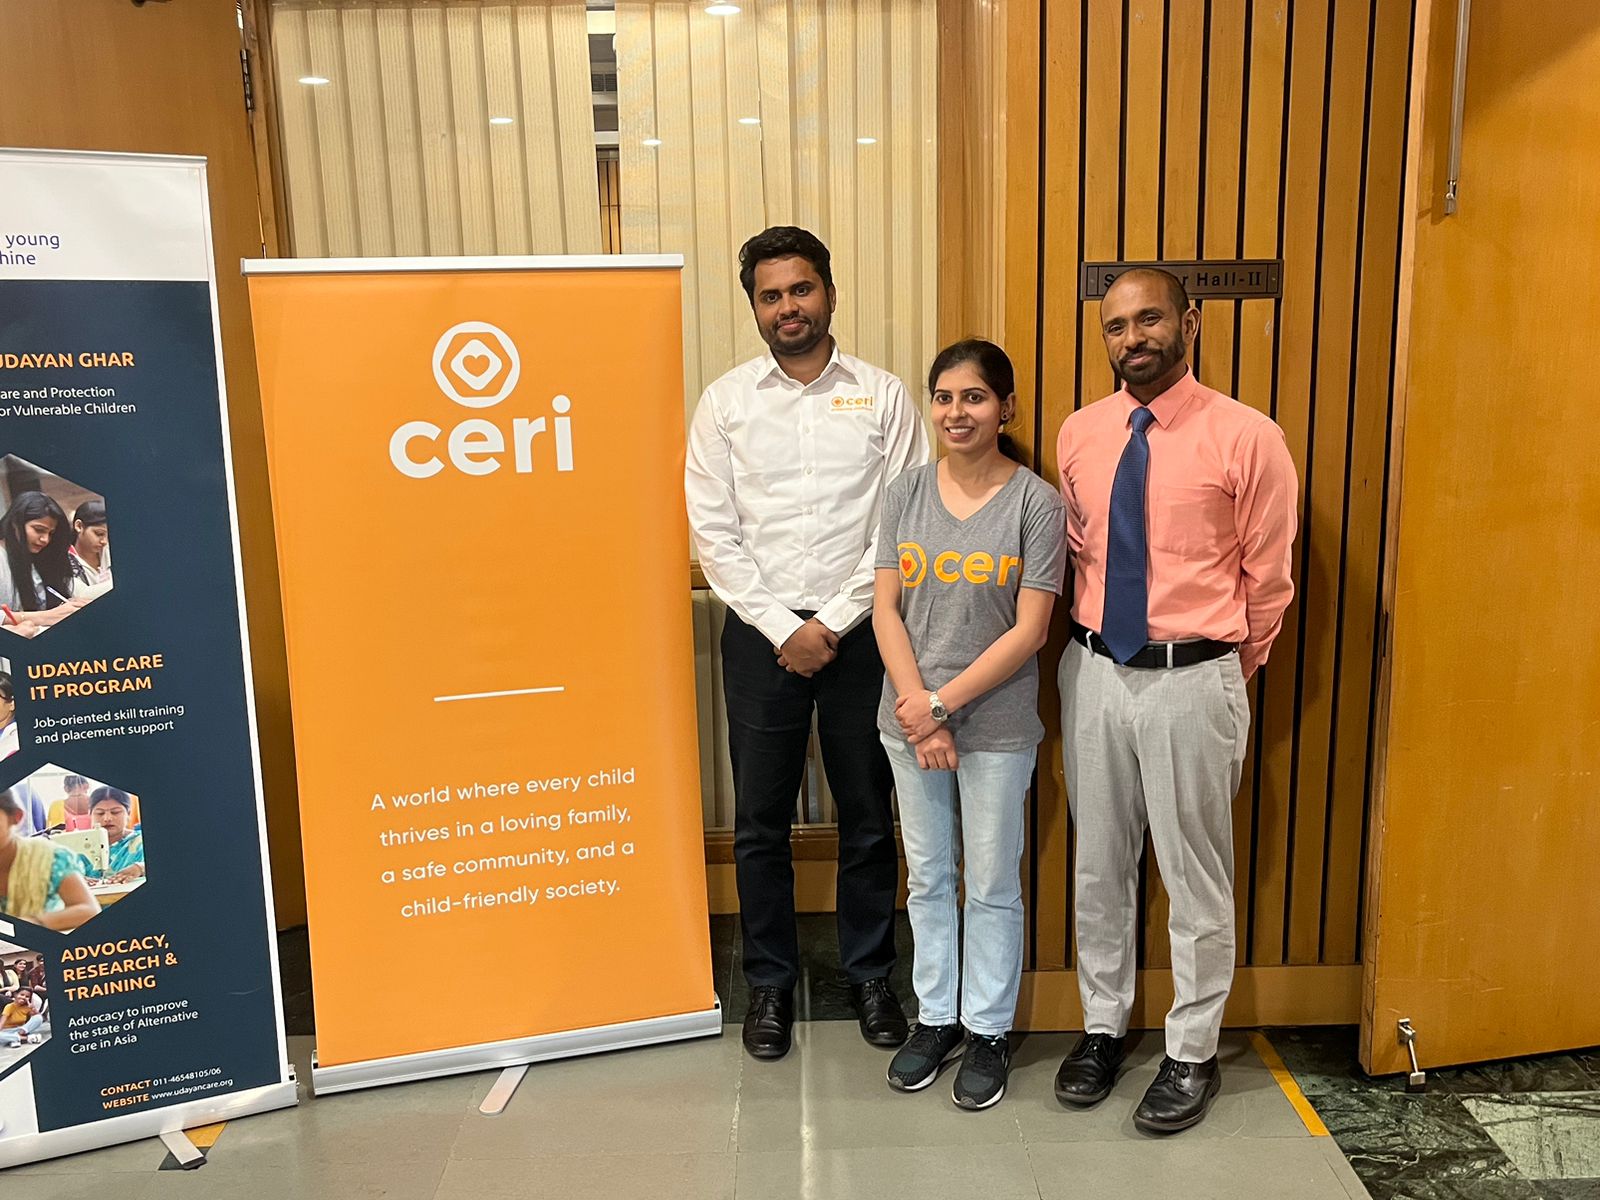 two men and one woman stand next to an orange sign that says ceri